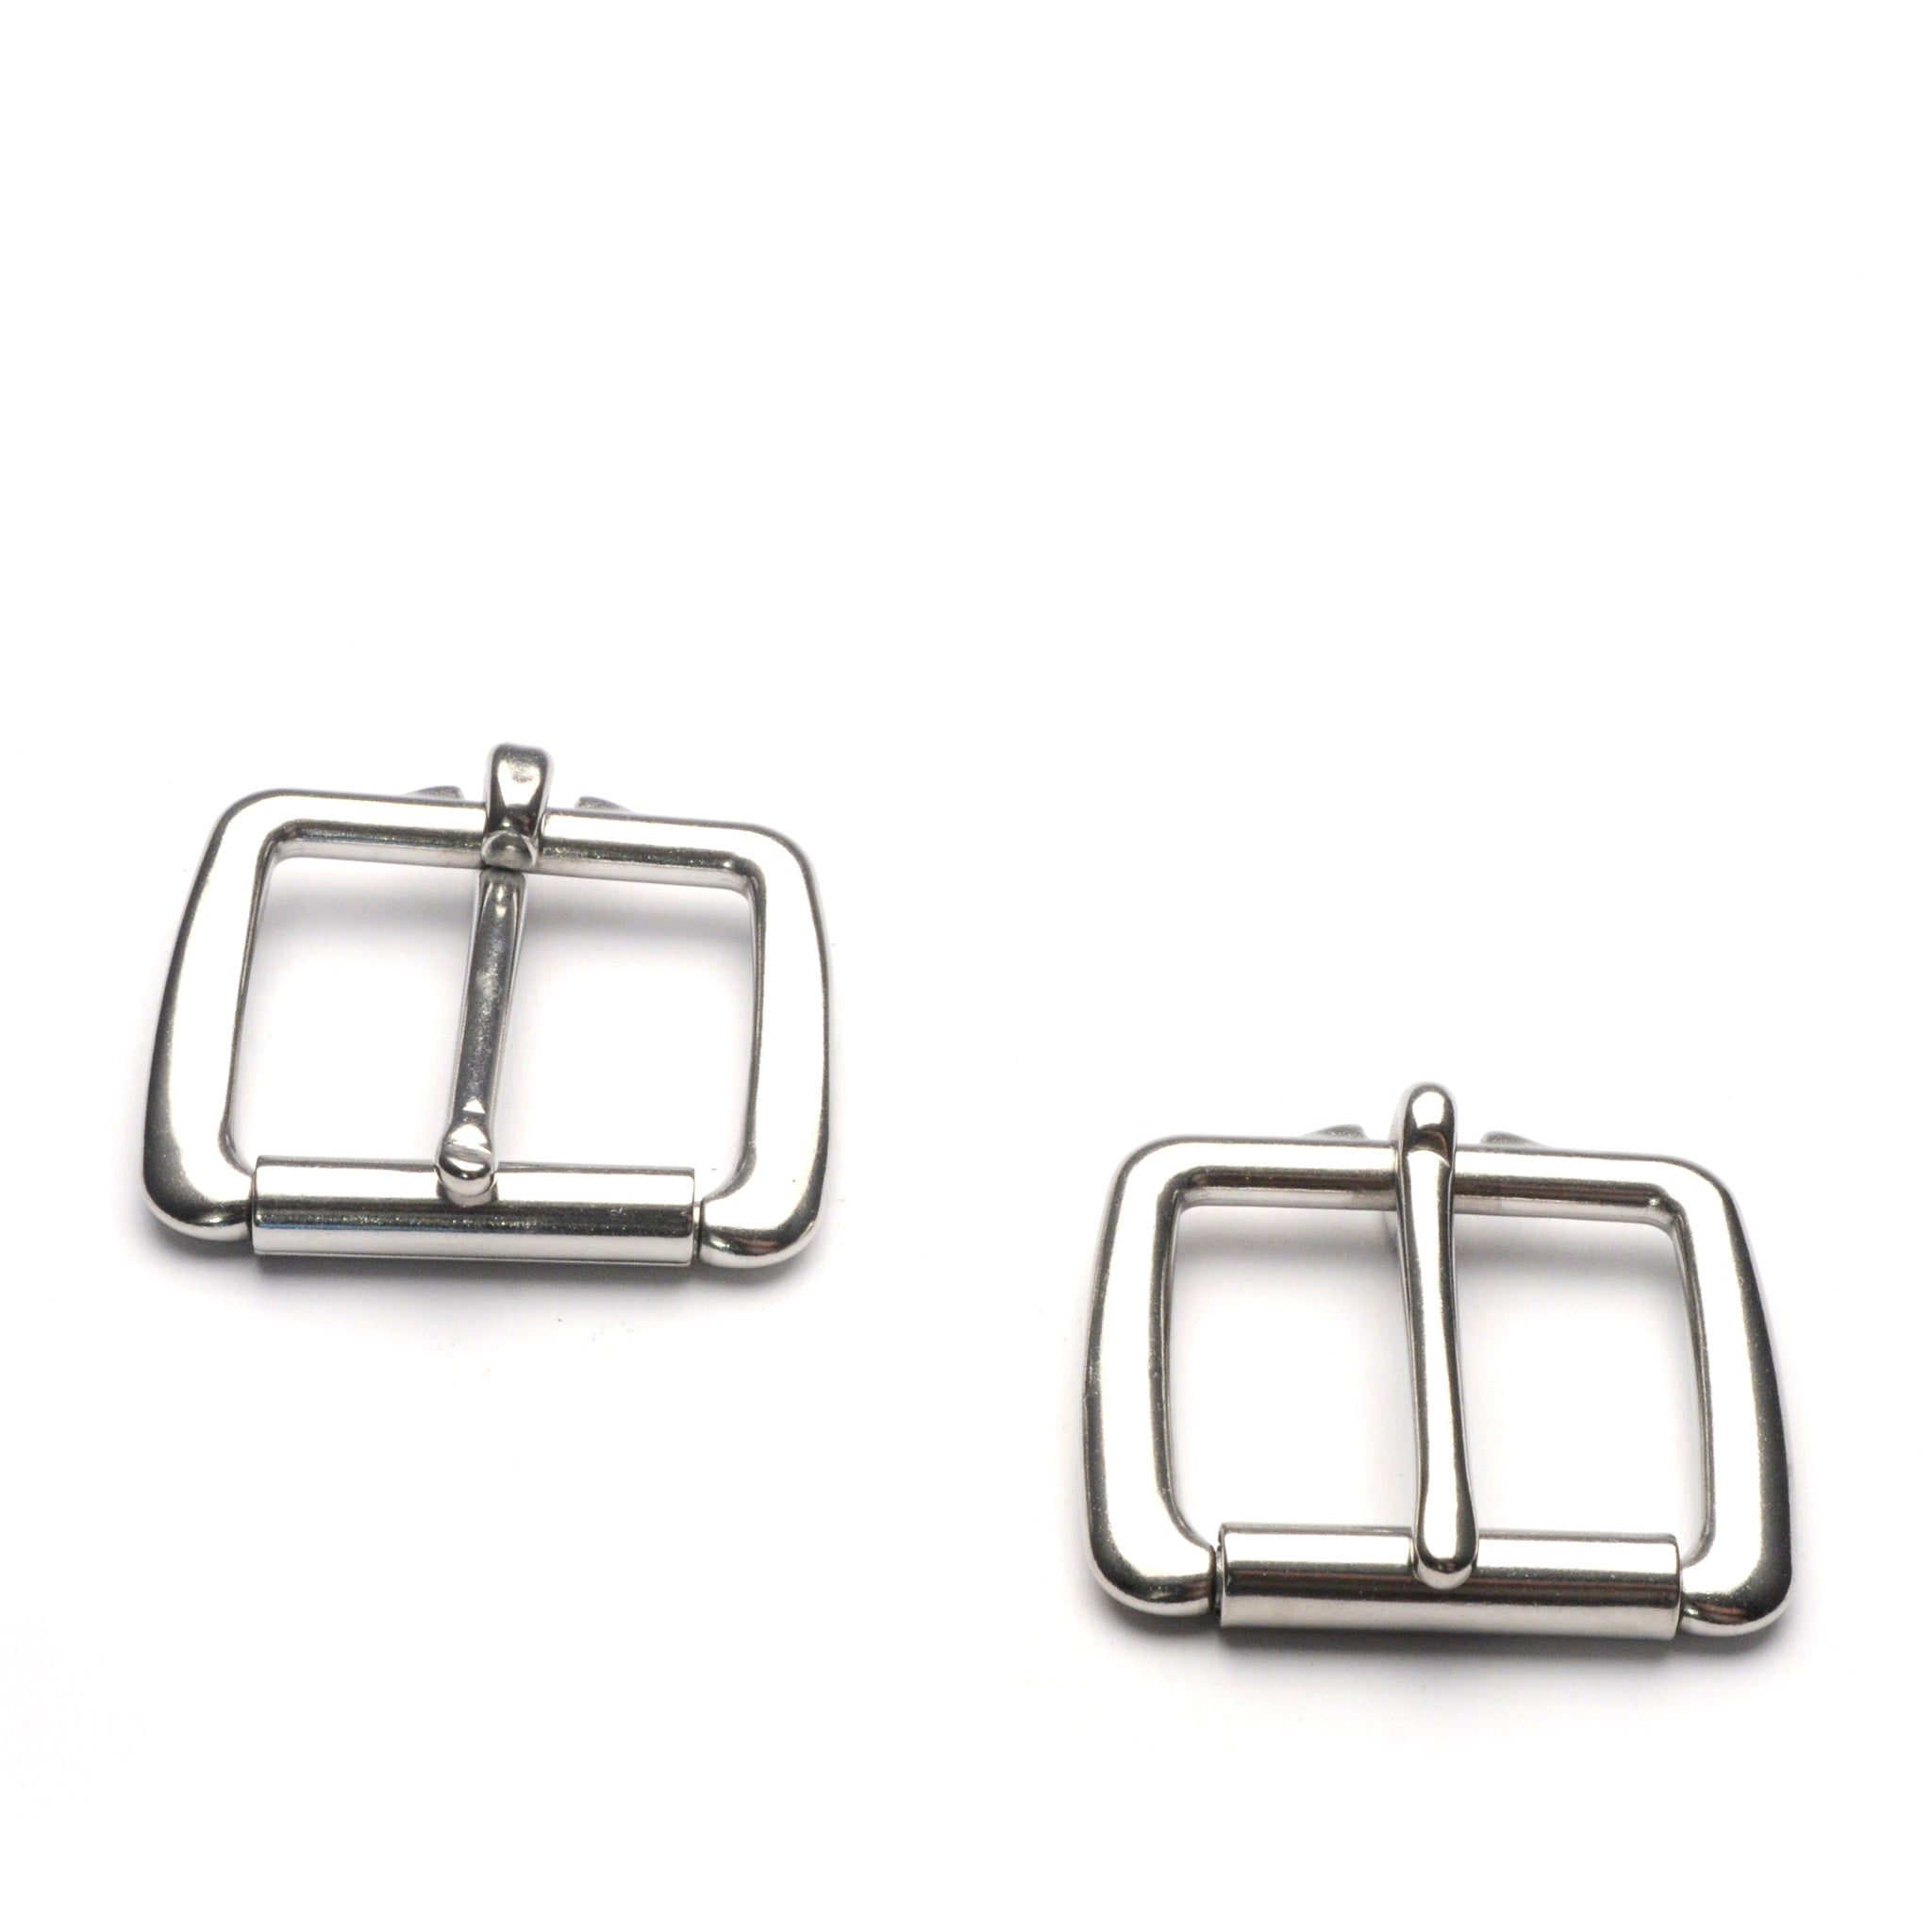 Heavy Duty Stainless Steel Roller Buckles from Identity Leathercraft